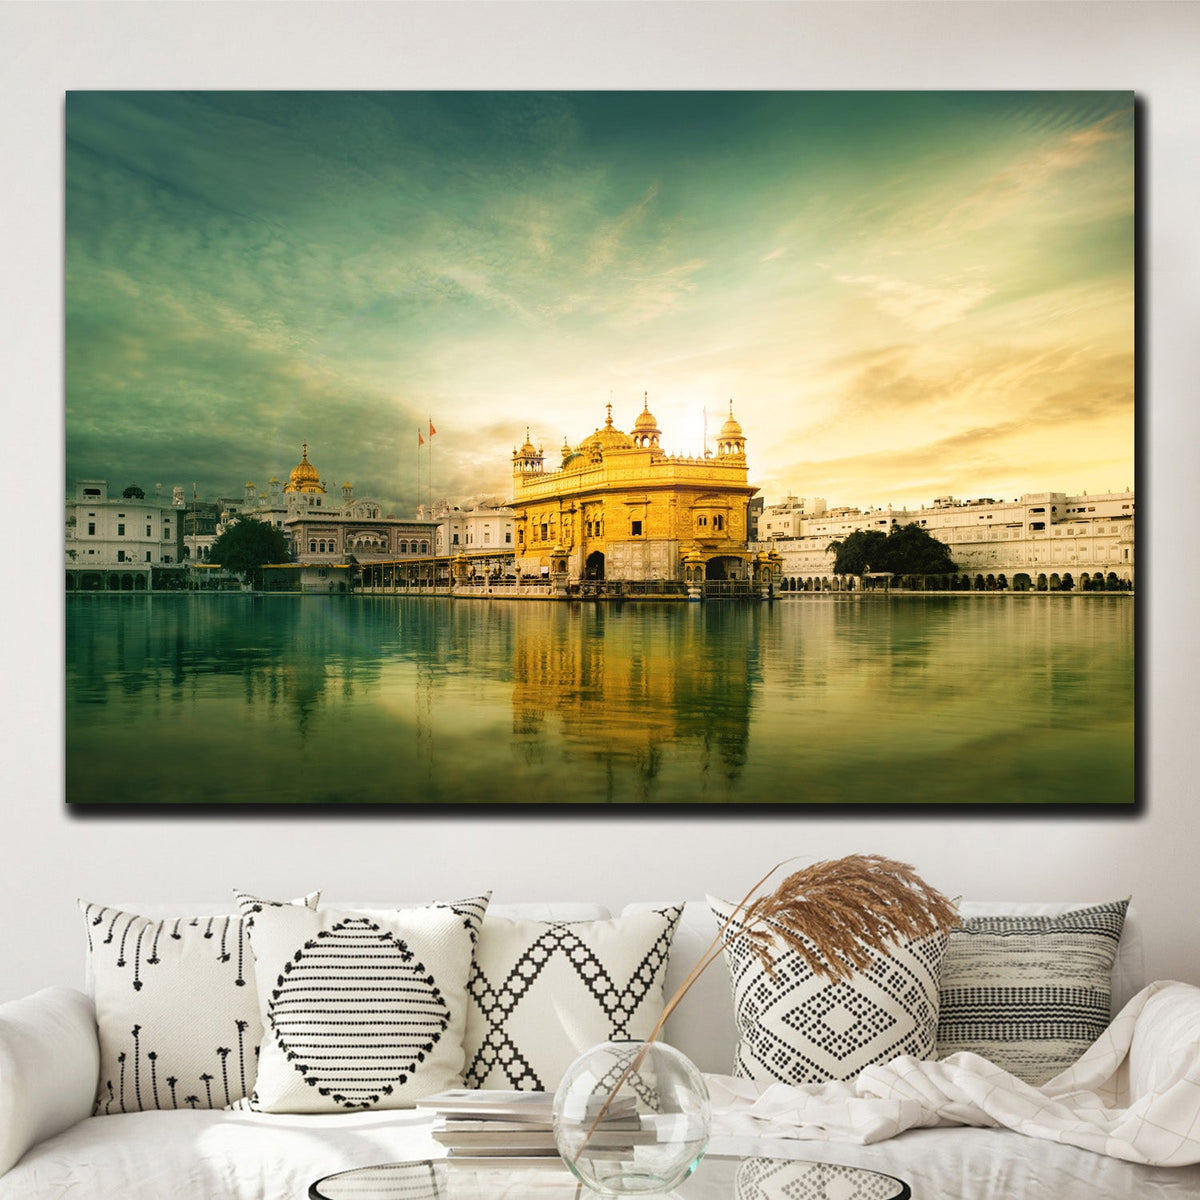 https://cdn.shopify.com/s/files/1/0387/9986/8044/products/GoldenTempleSkylineCanvasArtprintStretched-1.jpg